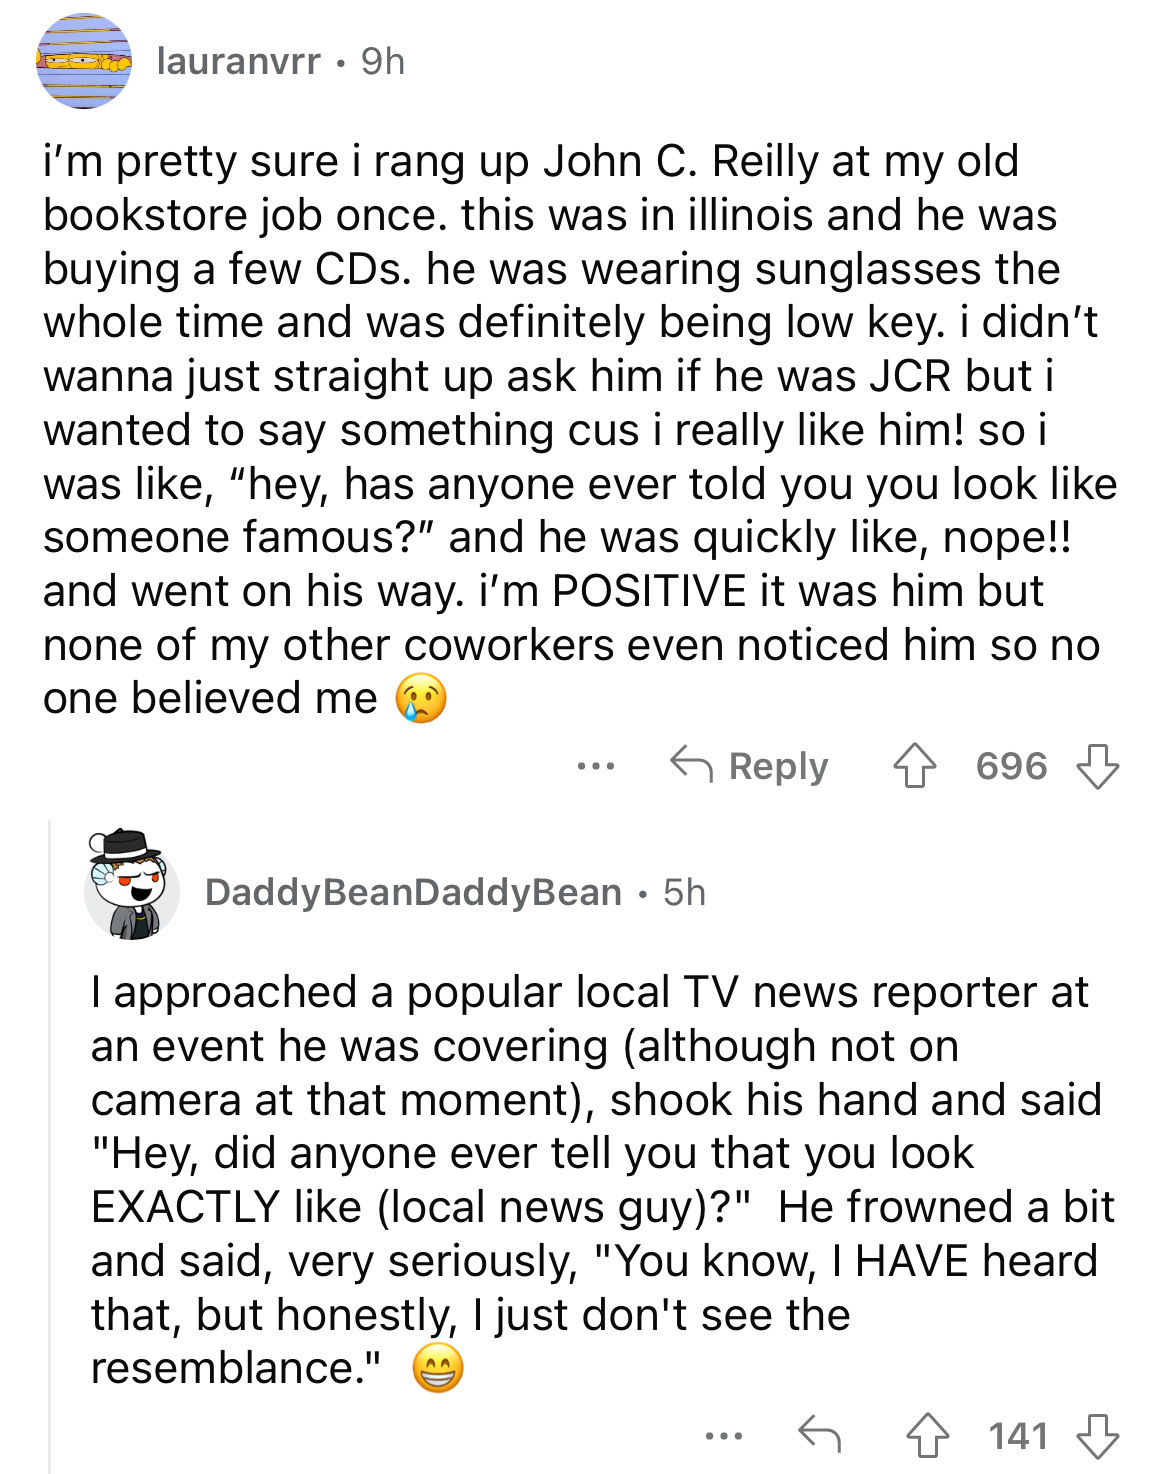 screenshot - lauranvrr 9h i'm pretty sure i rang up John C. Reilly at my old bookstore job once. this was in illinois and he was buying a few CDs. he was wearing sunglasses the whole time and was definitely being low key. i didn't wanna just straight up a